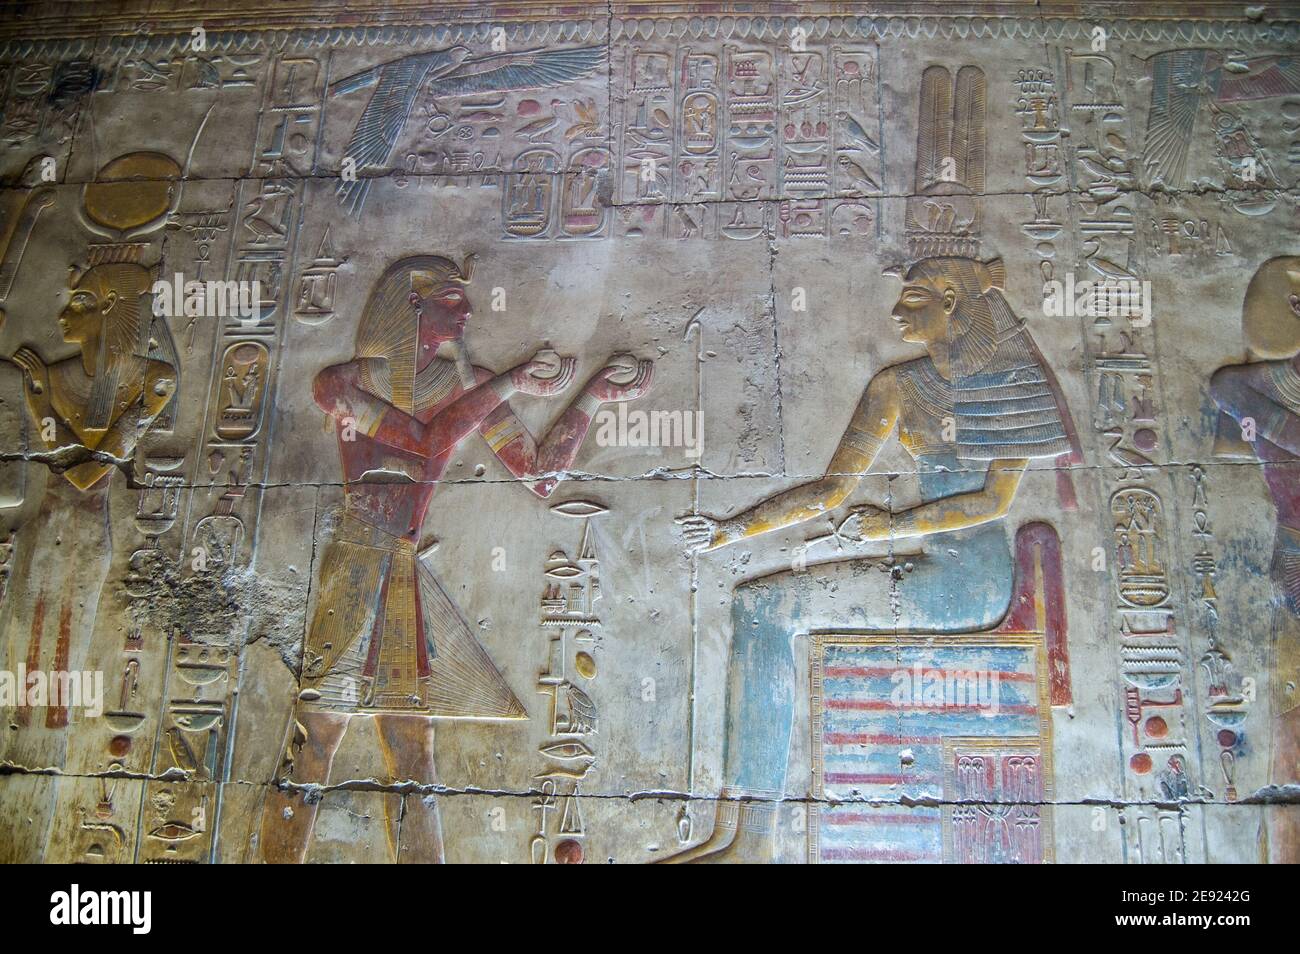 Ancient Egyptian bas relief showing Pharaoh Seti I offering scented oil to the goddess Maat. Inner wall of Temple to Osiris at Abydos, El Balyana, Egy Stock Photo